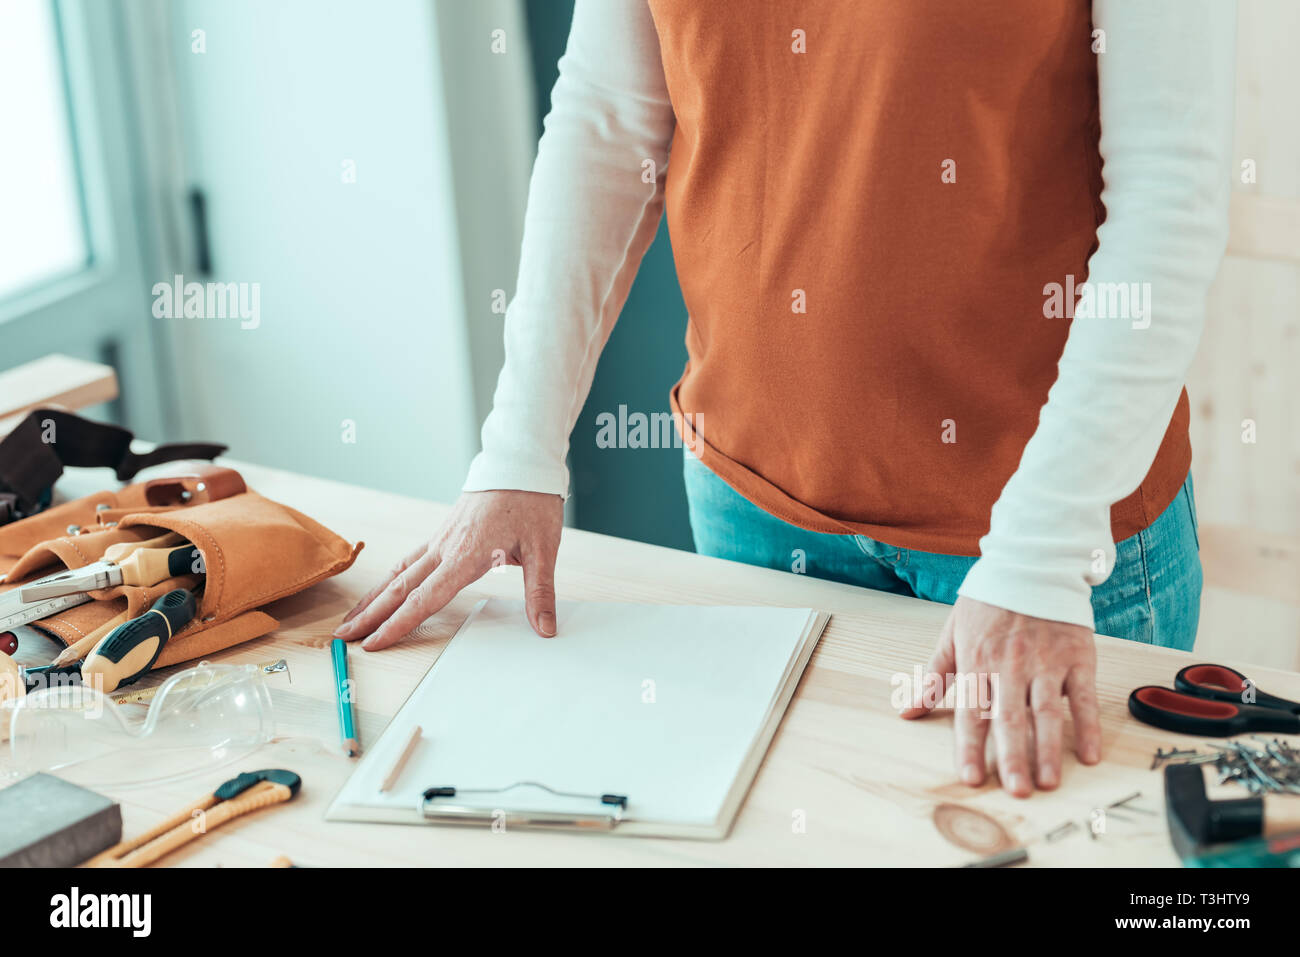 Female carpenter with hands on the desk in small business woodwork workshop Stock Photo